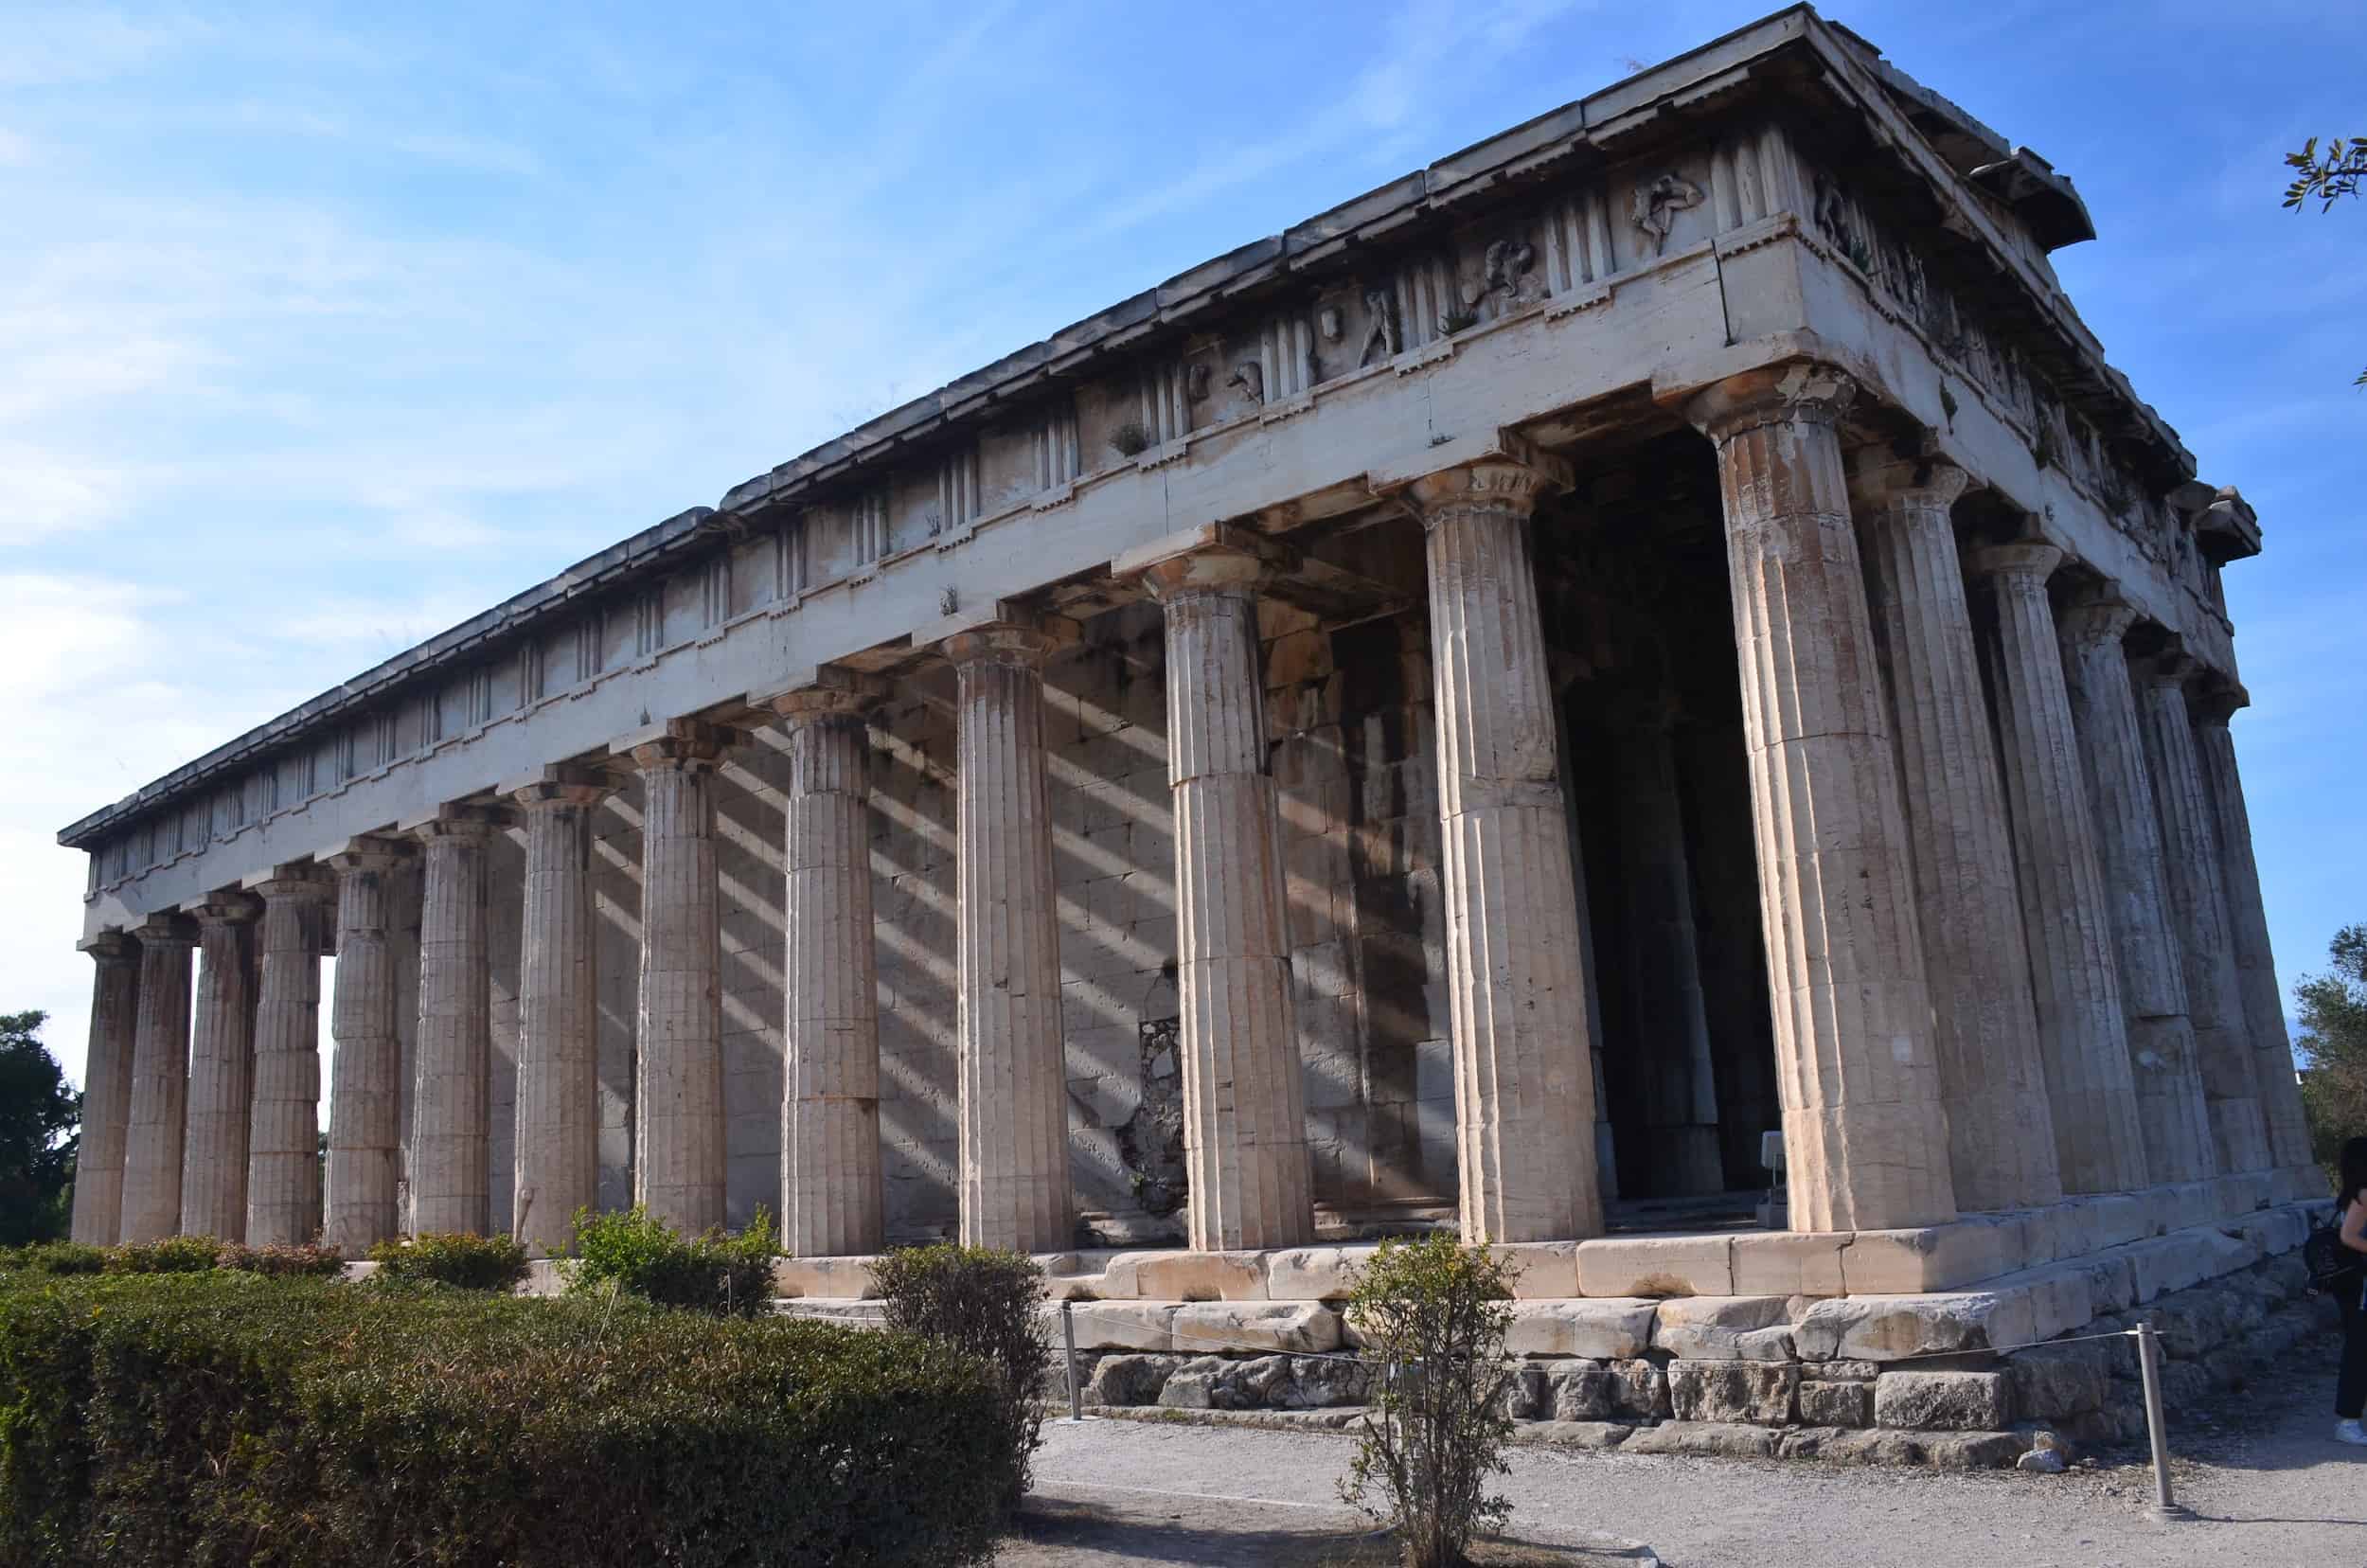 South side of the Temple of Hephaestus at the Ancient Agora of Athens